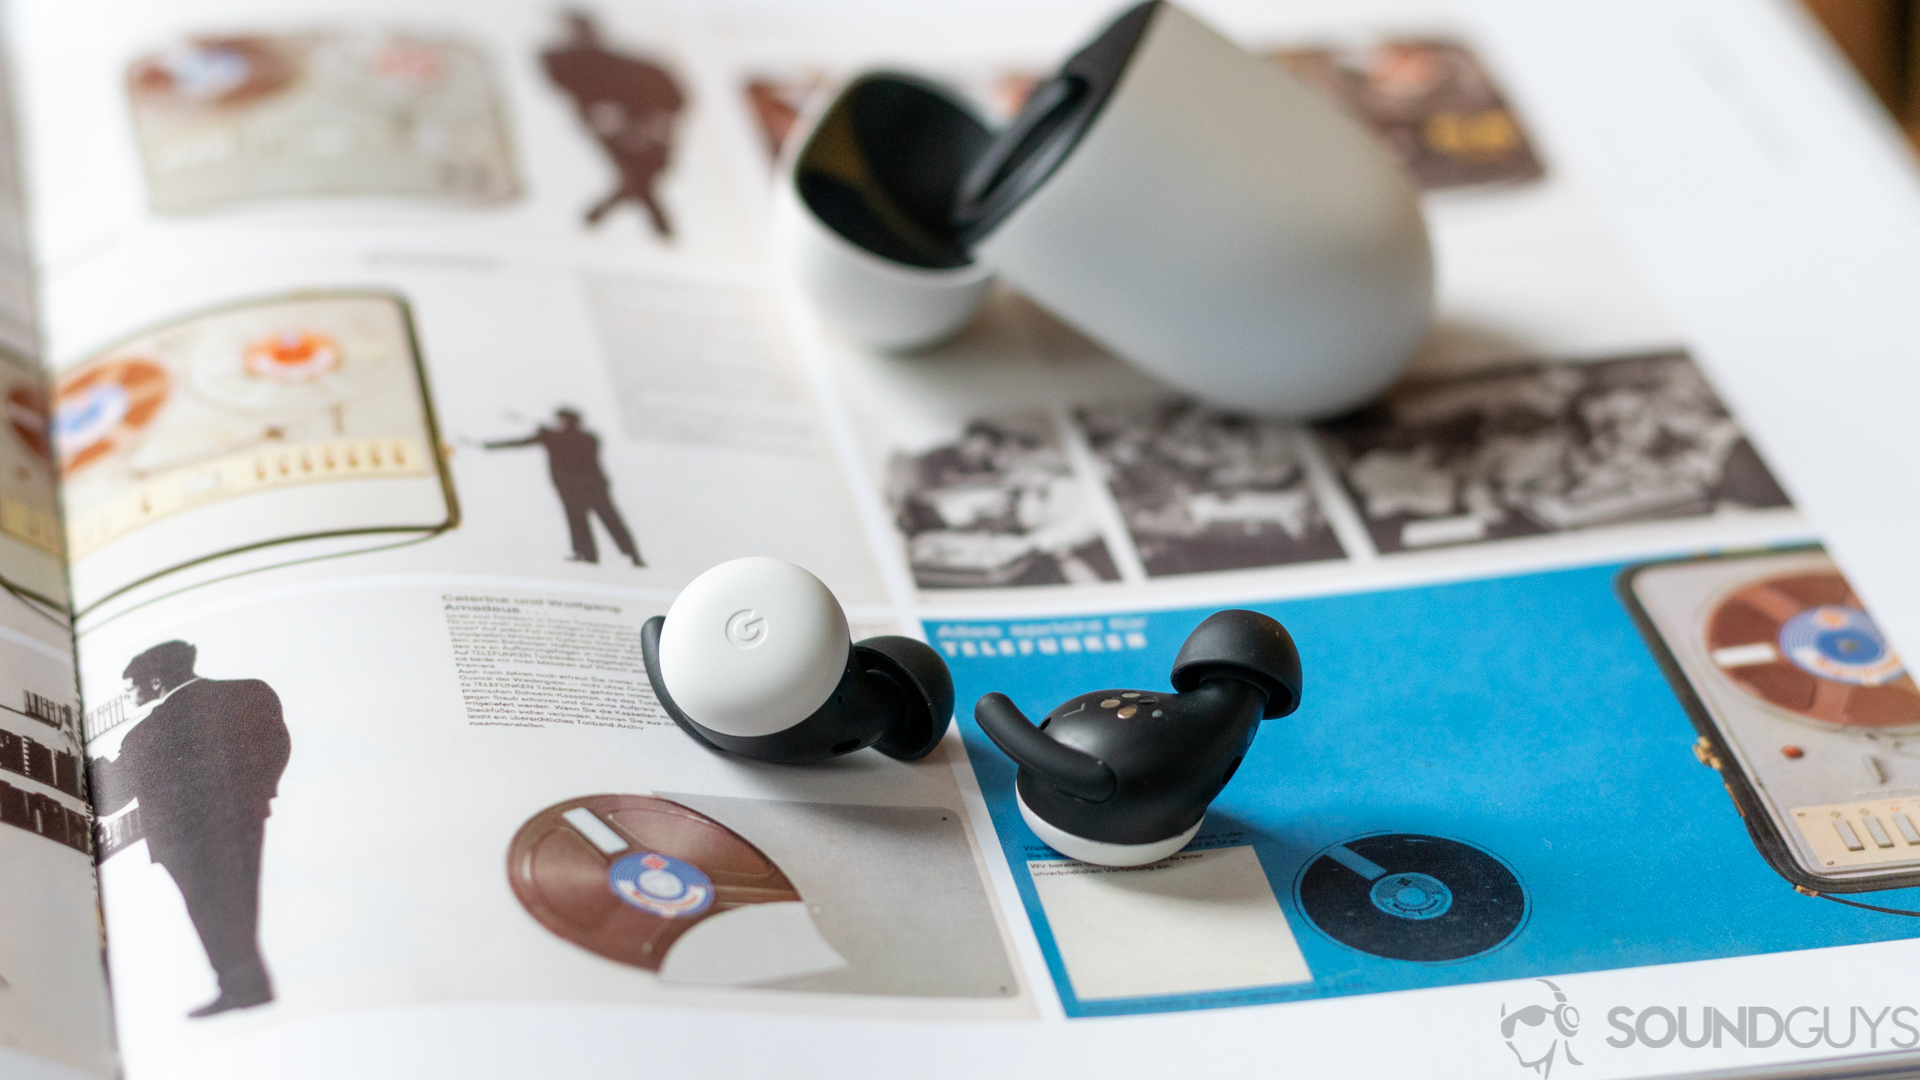 The new Google Pixel Buds on the page of a colorful book with open charging case in the background.